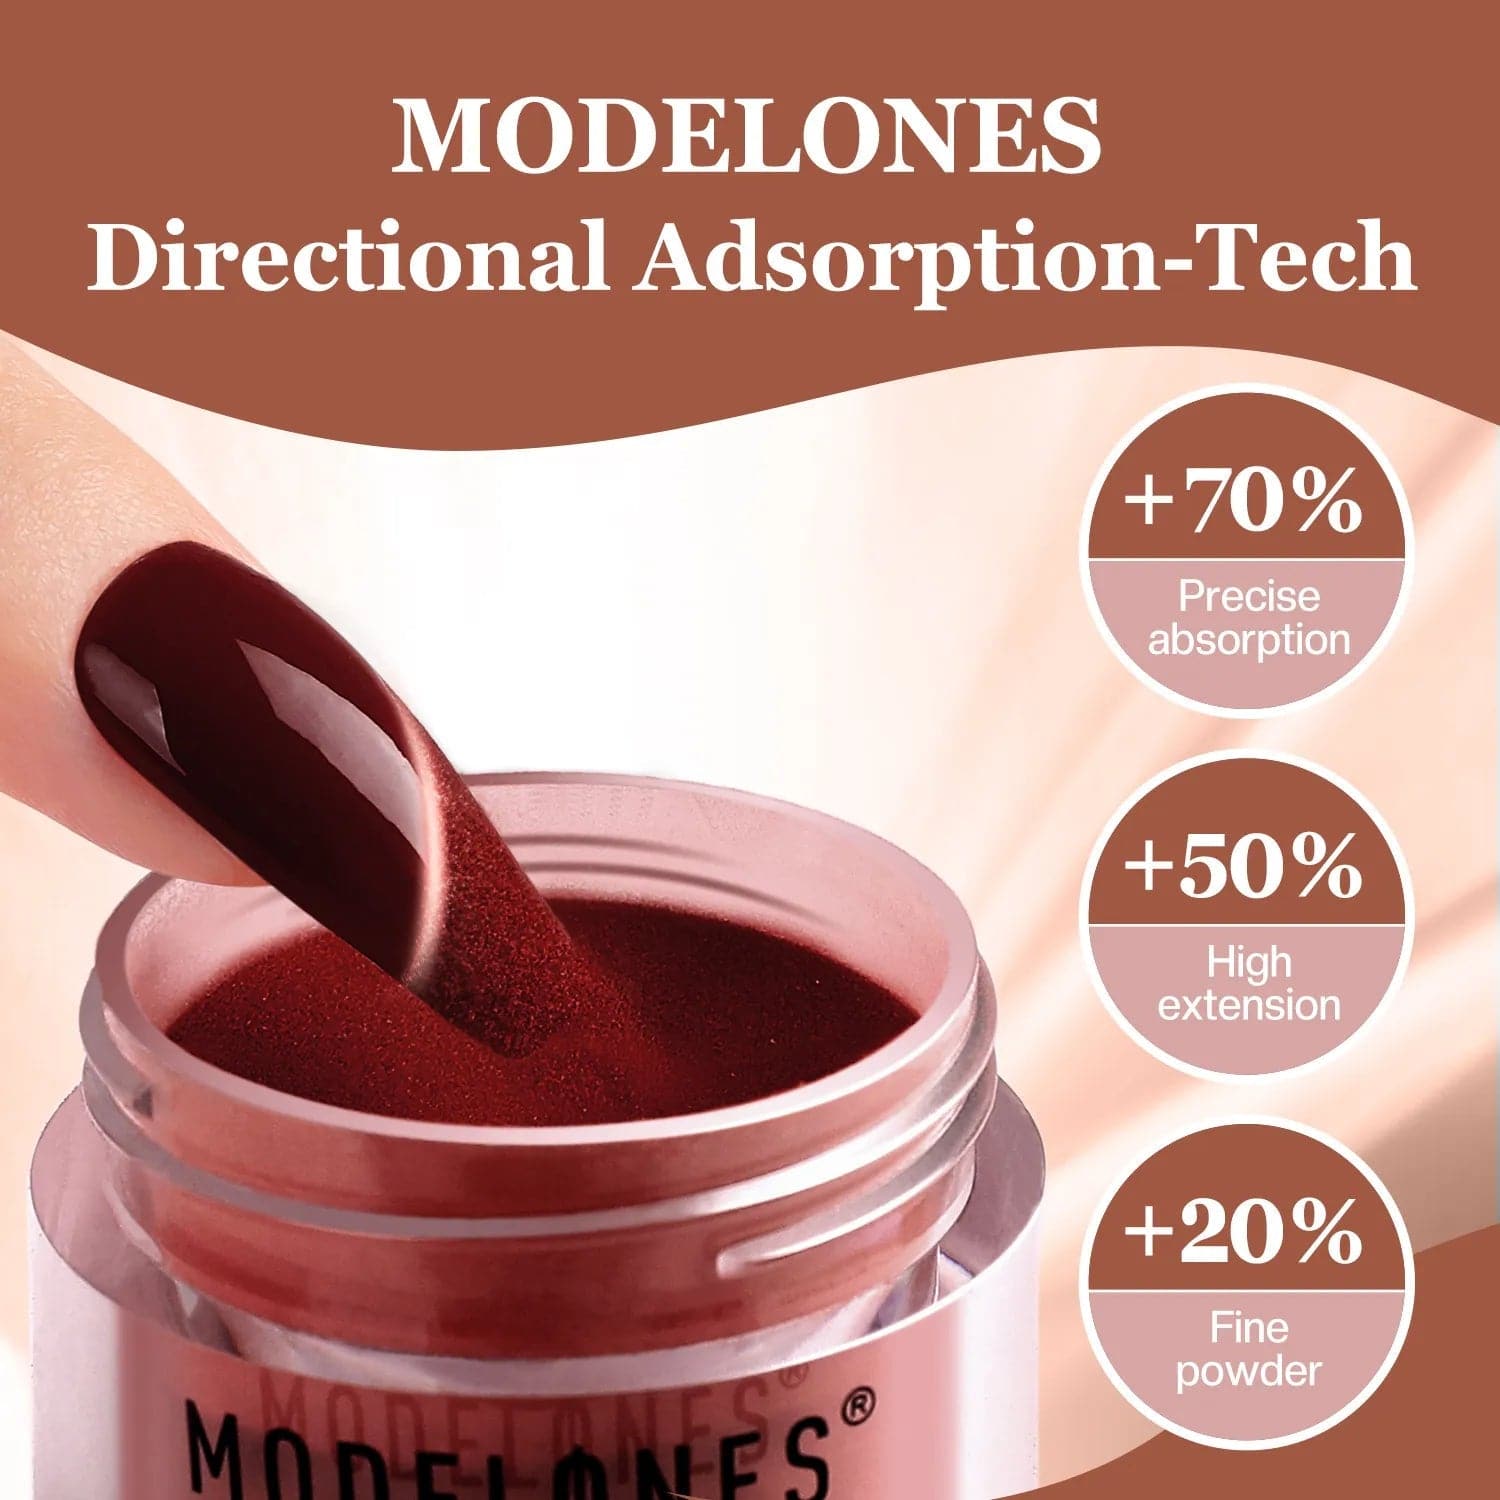 Sweet Old Time - 10Pcs Dipping Powder All-In-One Kit 【US ONLY】 - MODELONES.com